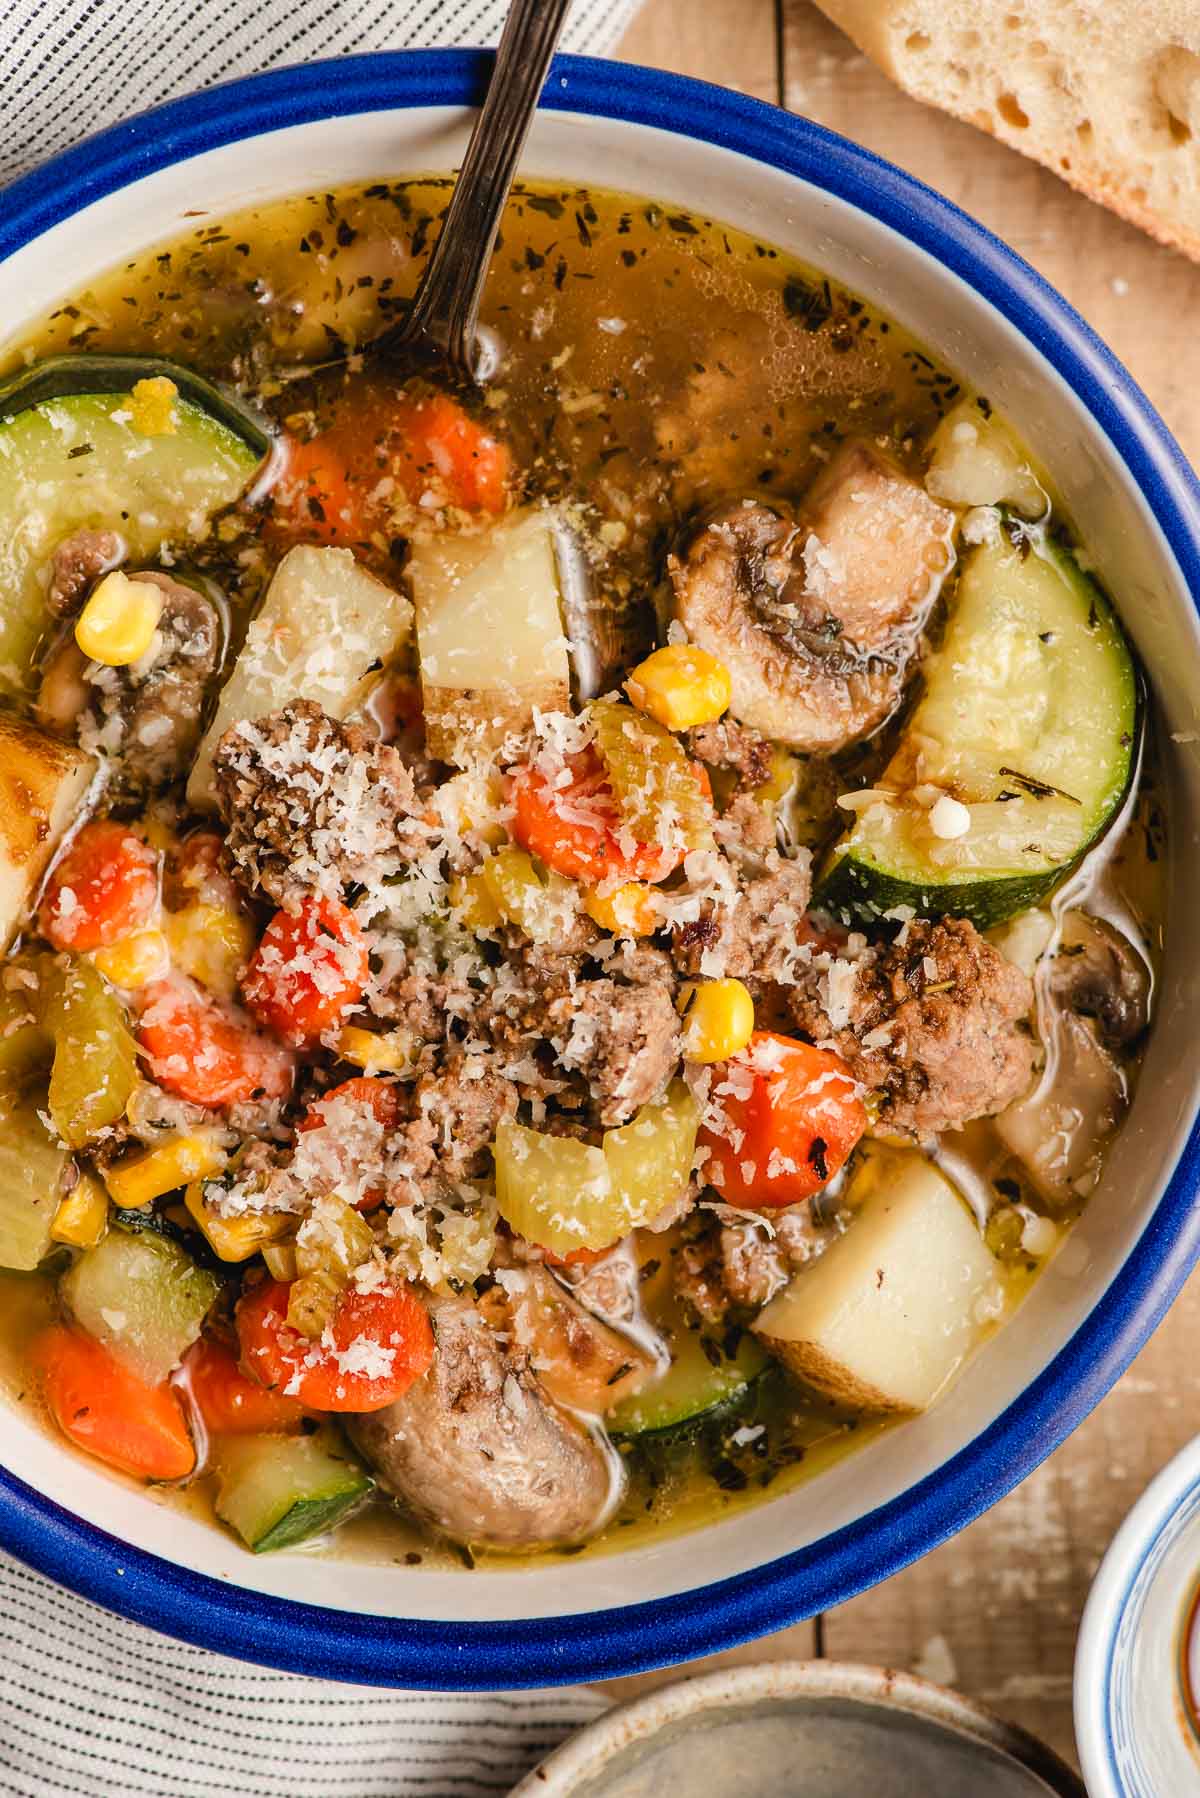 Bowl of vegetable soup with ground beef, sprinkled with Parmesan cheese.